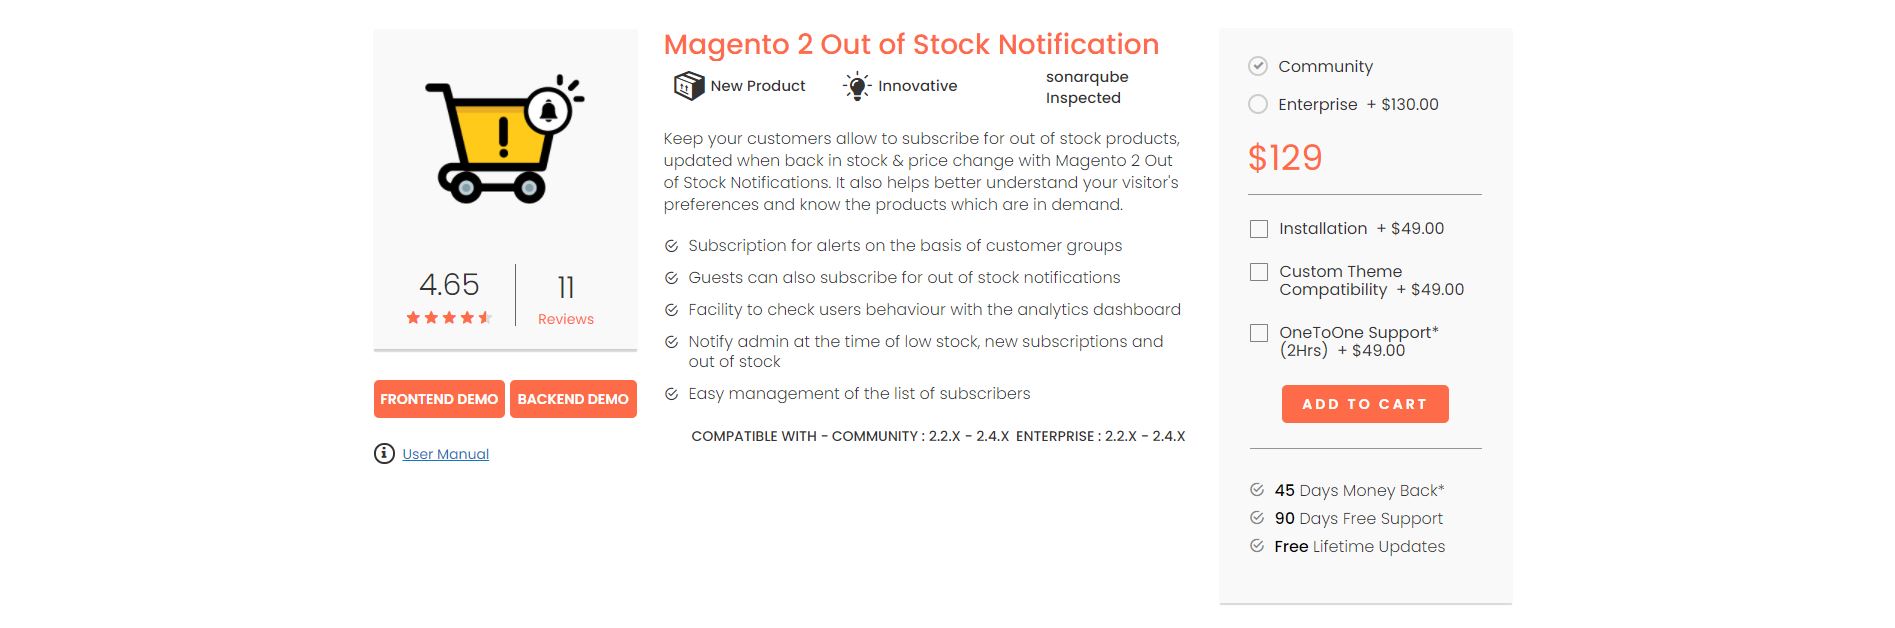 Magento out of stock notification extension